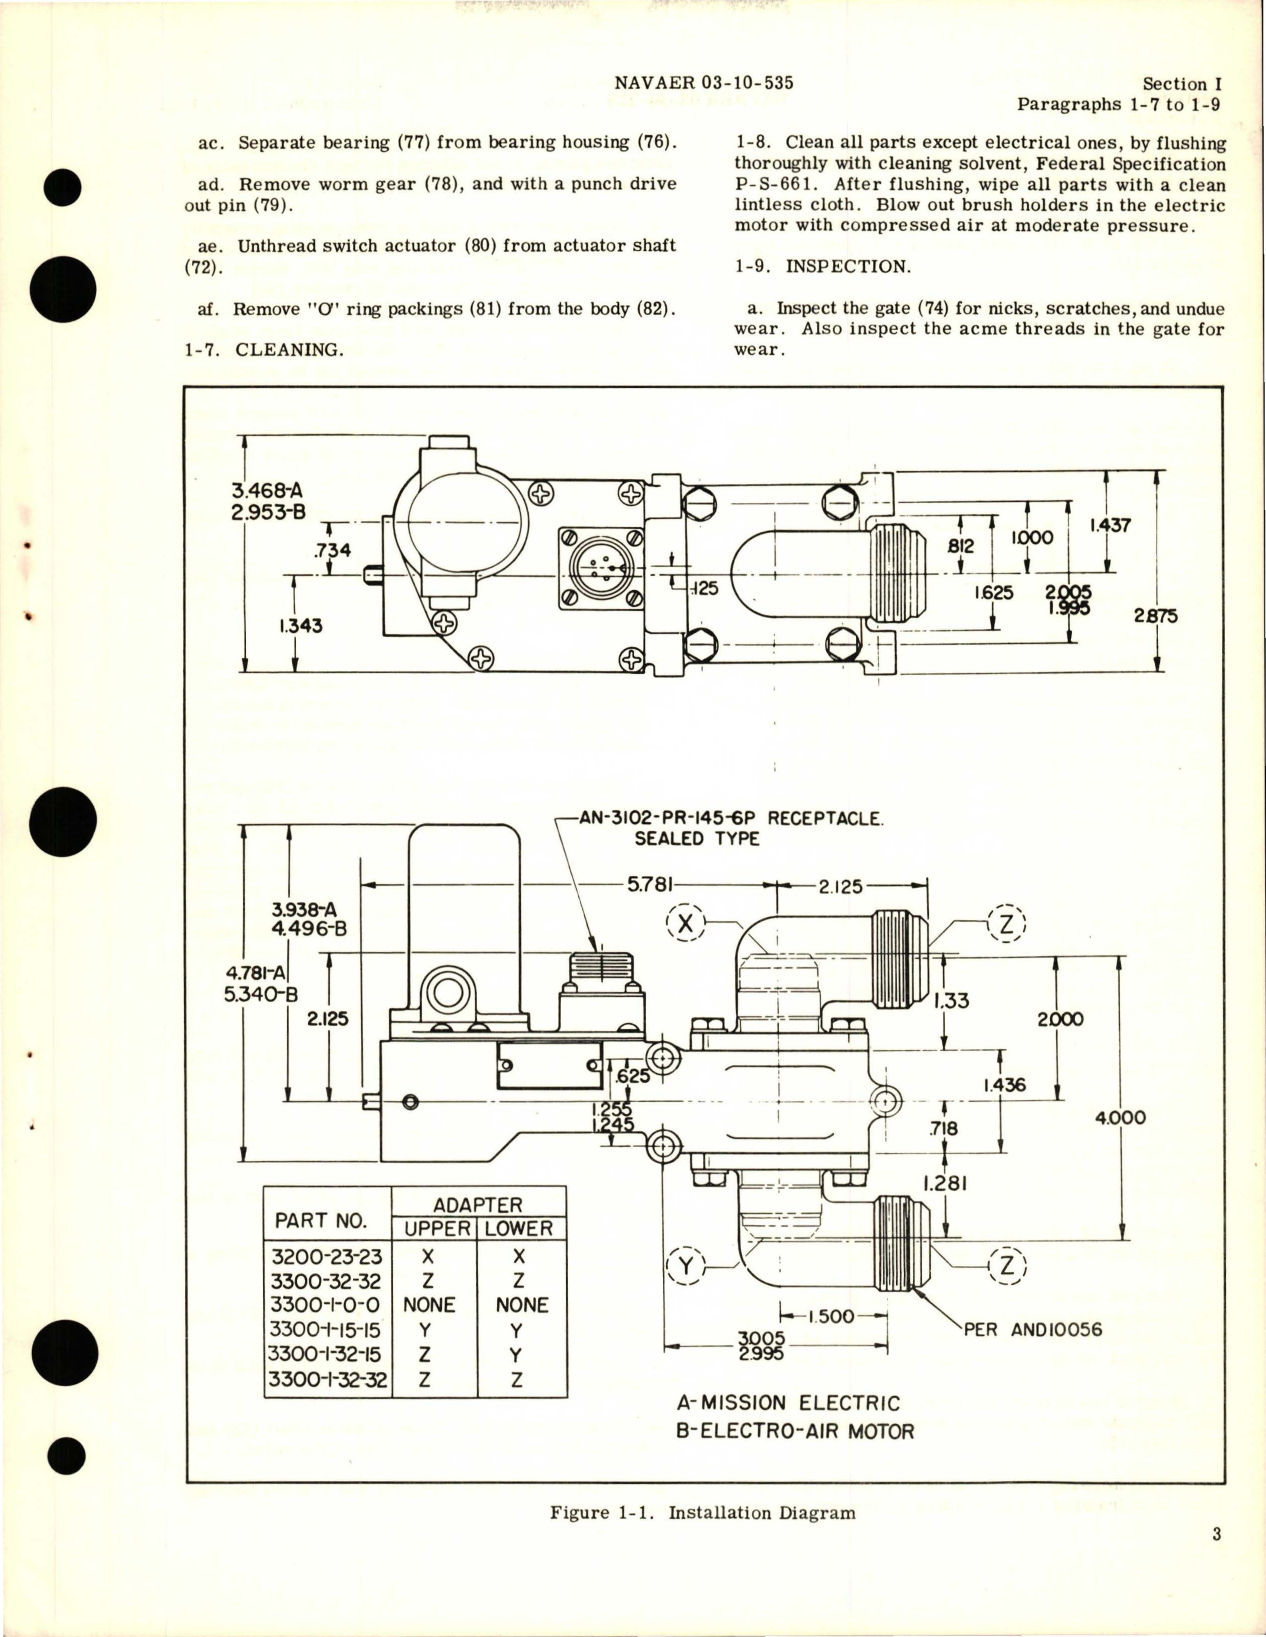 Sample page 5 from AirCorps Library document: Overhaul Instructions with Parts Catalog for Electric Shut-Off Gate Valves